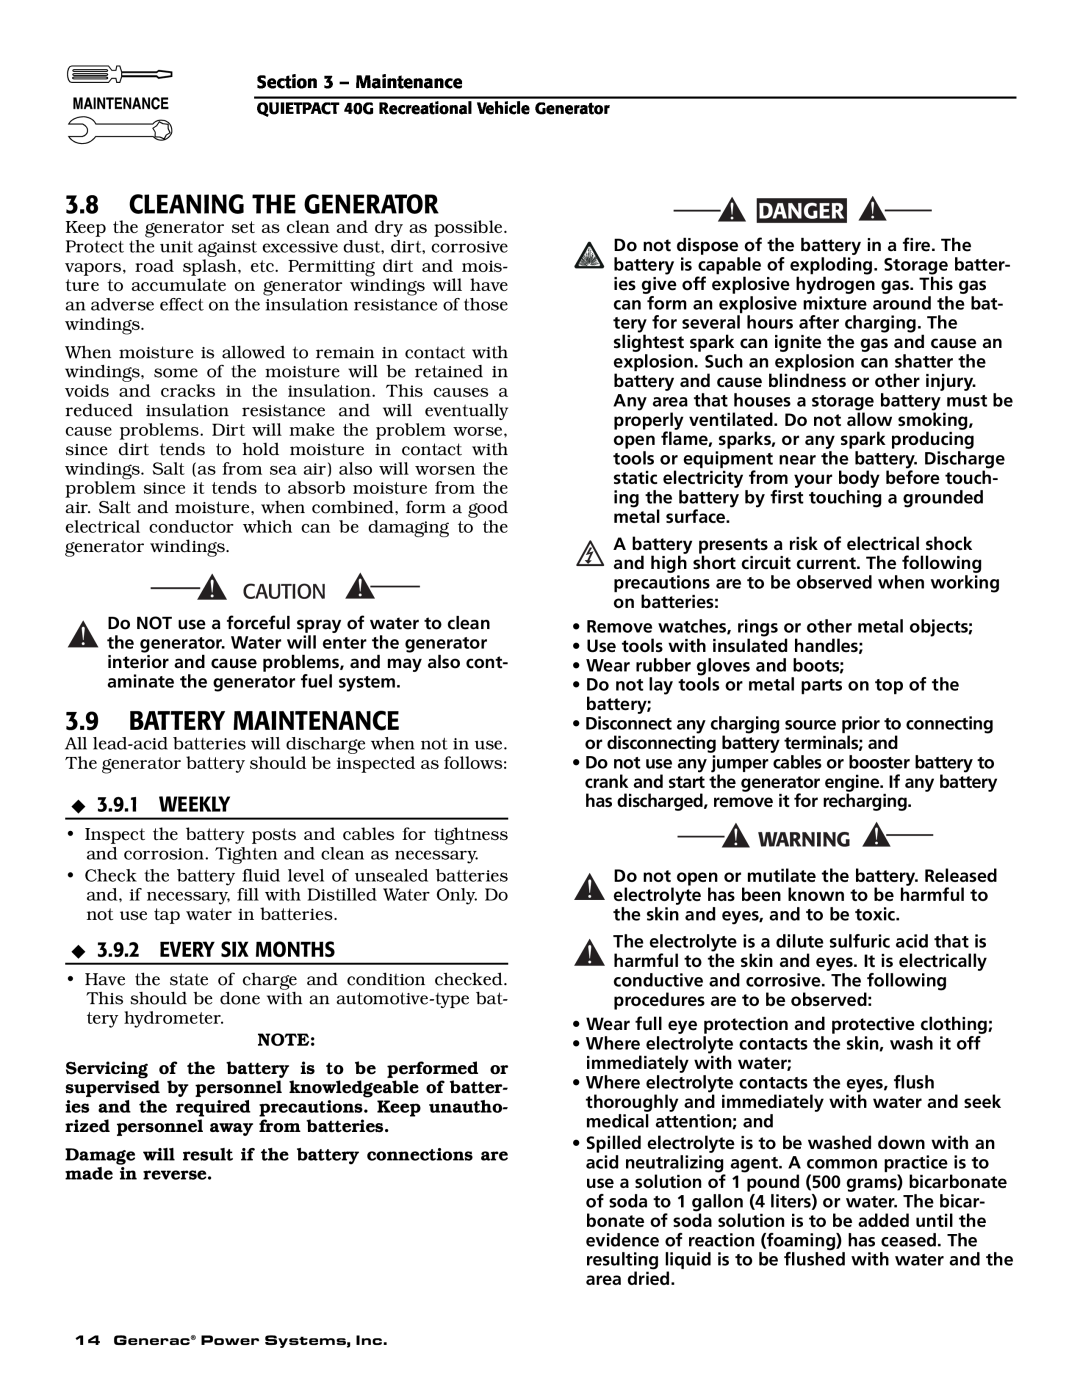 Generac 004700-0 owner manual Cleaning The Generator, Battery Maintenance, Weekly, Every Six Months, Danger 